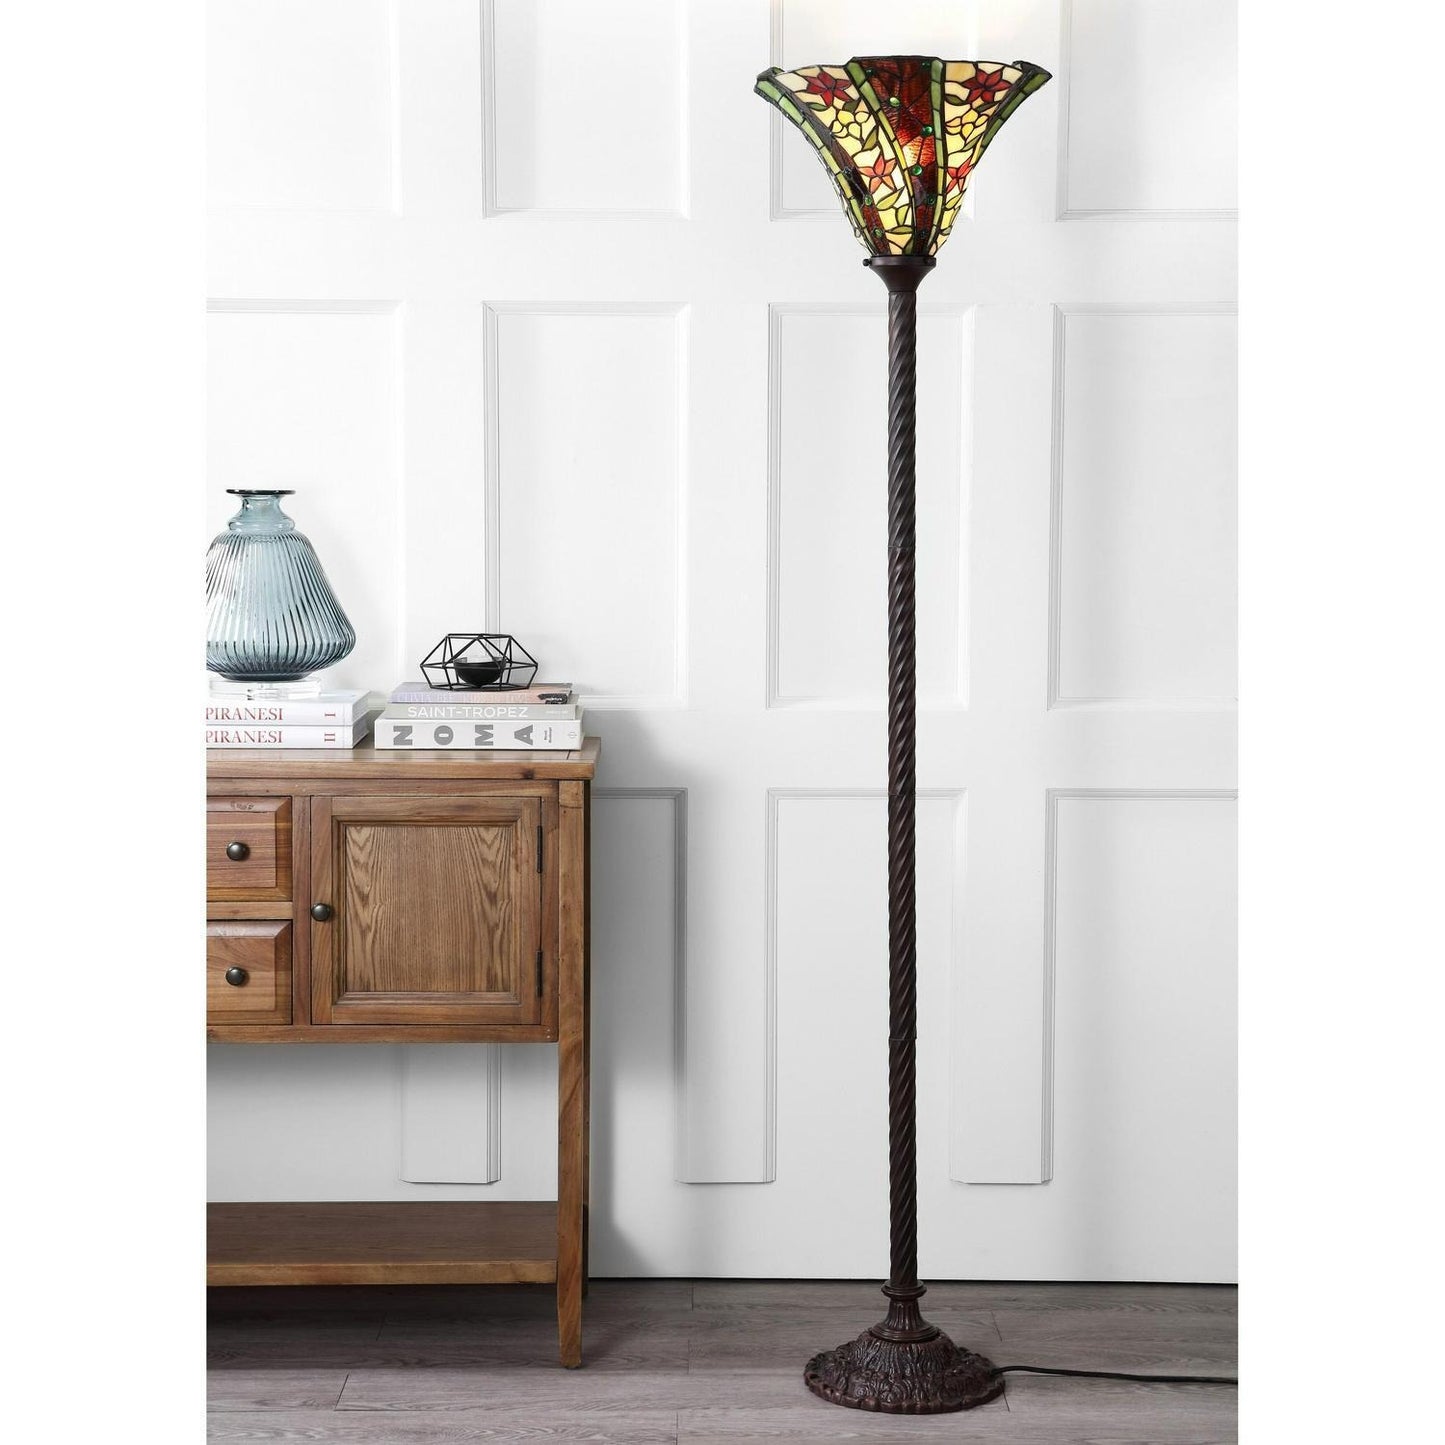 Tiffany Style Torchiere Multicolor Floral Stained Glass Floor Lamp